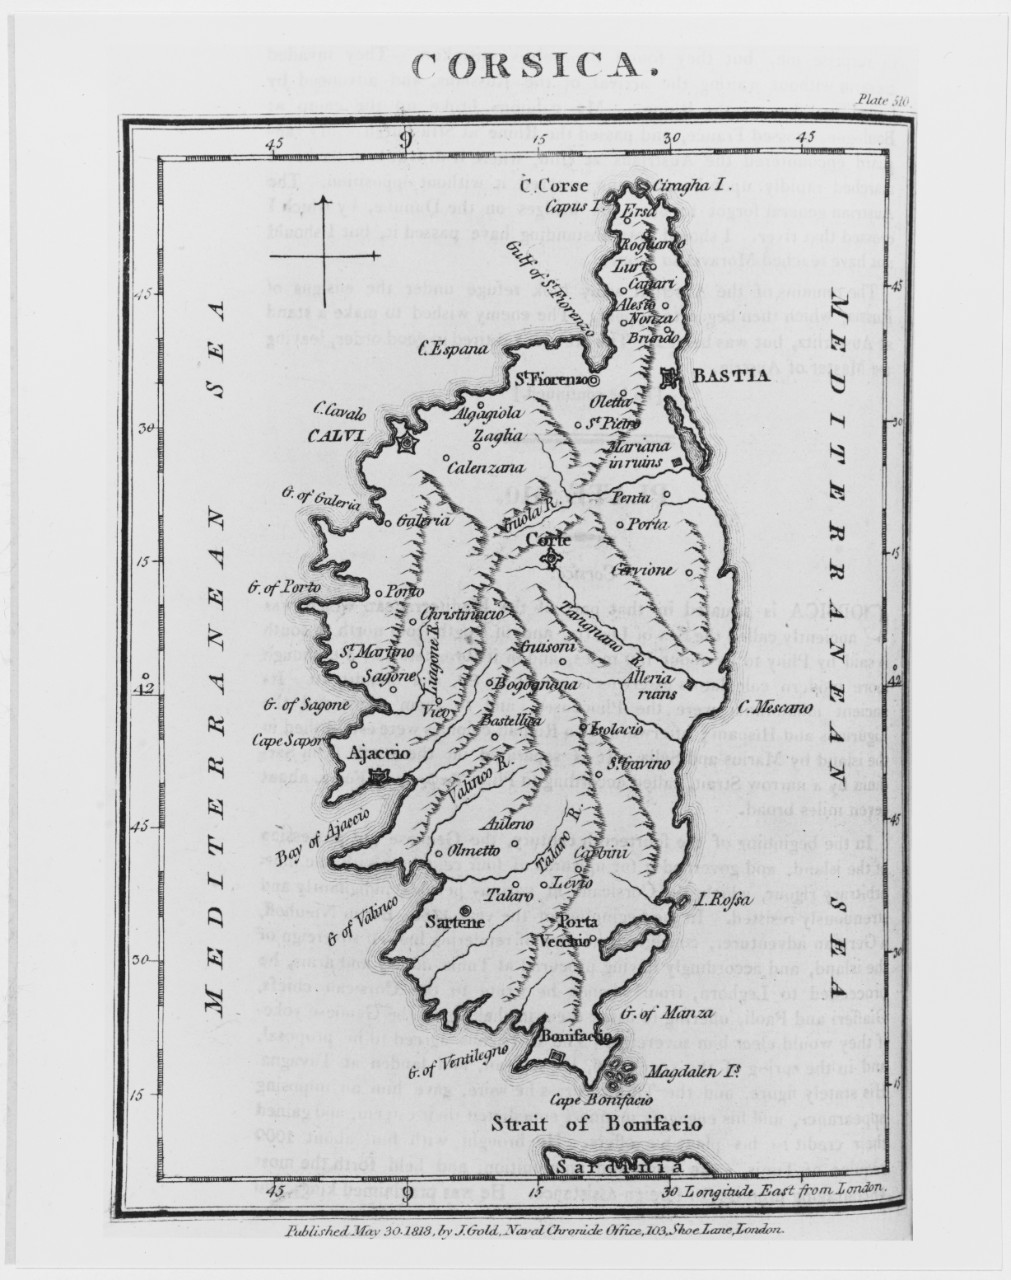 Corsica. Map published in the Naval Chronicle, London, 1818